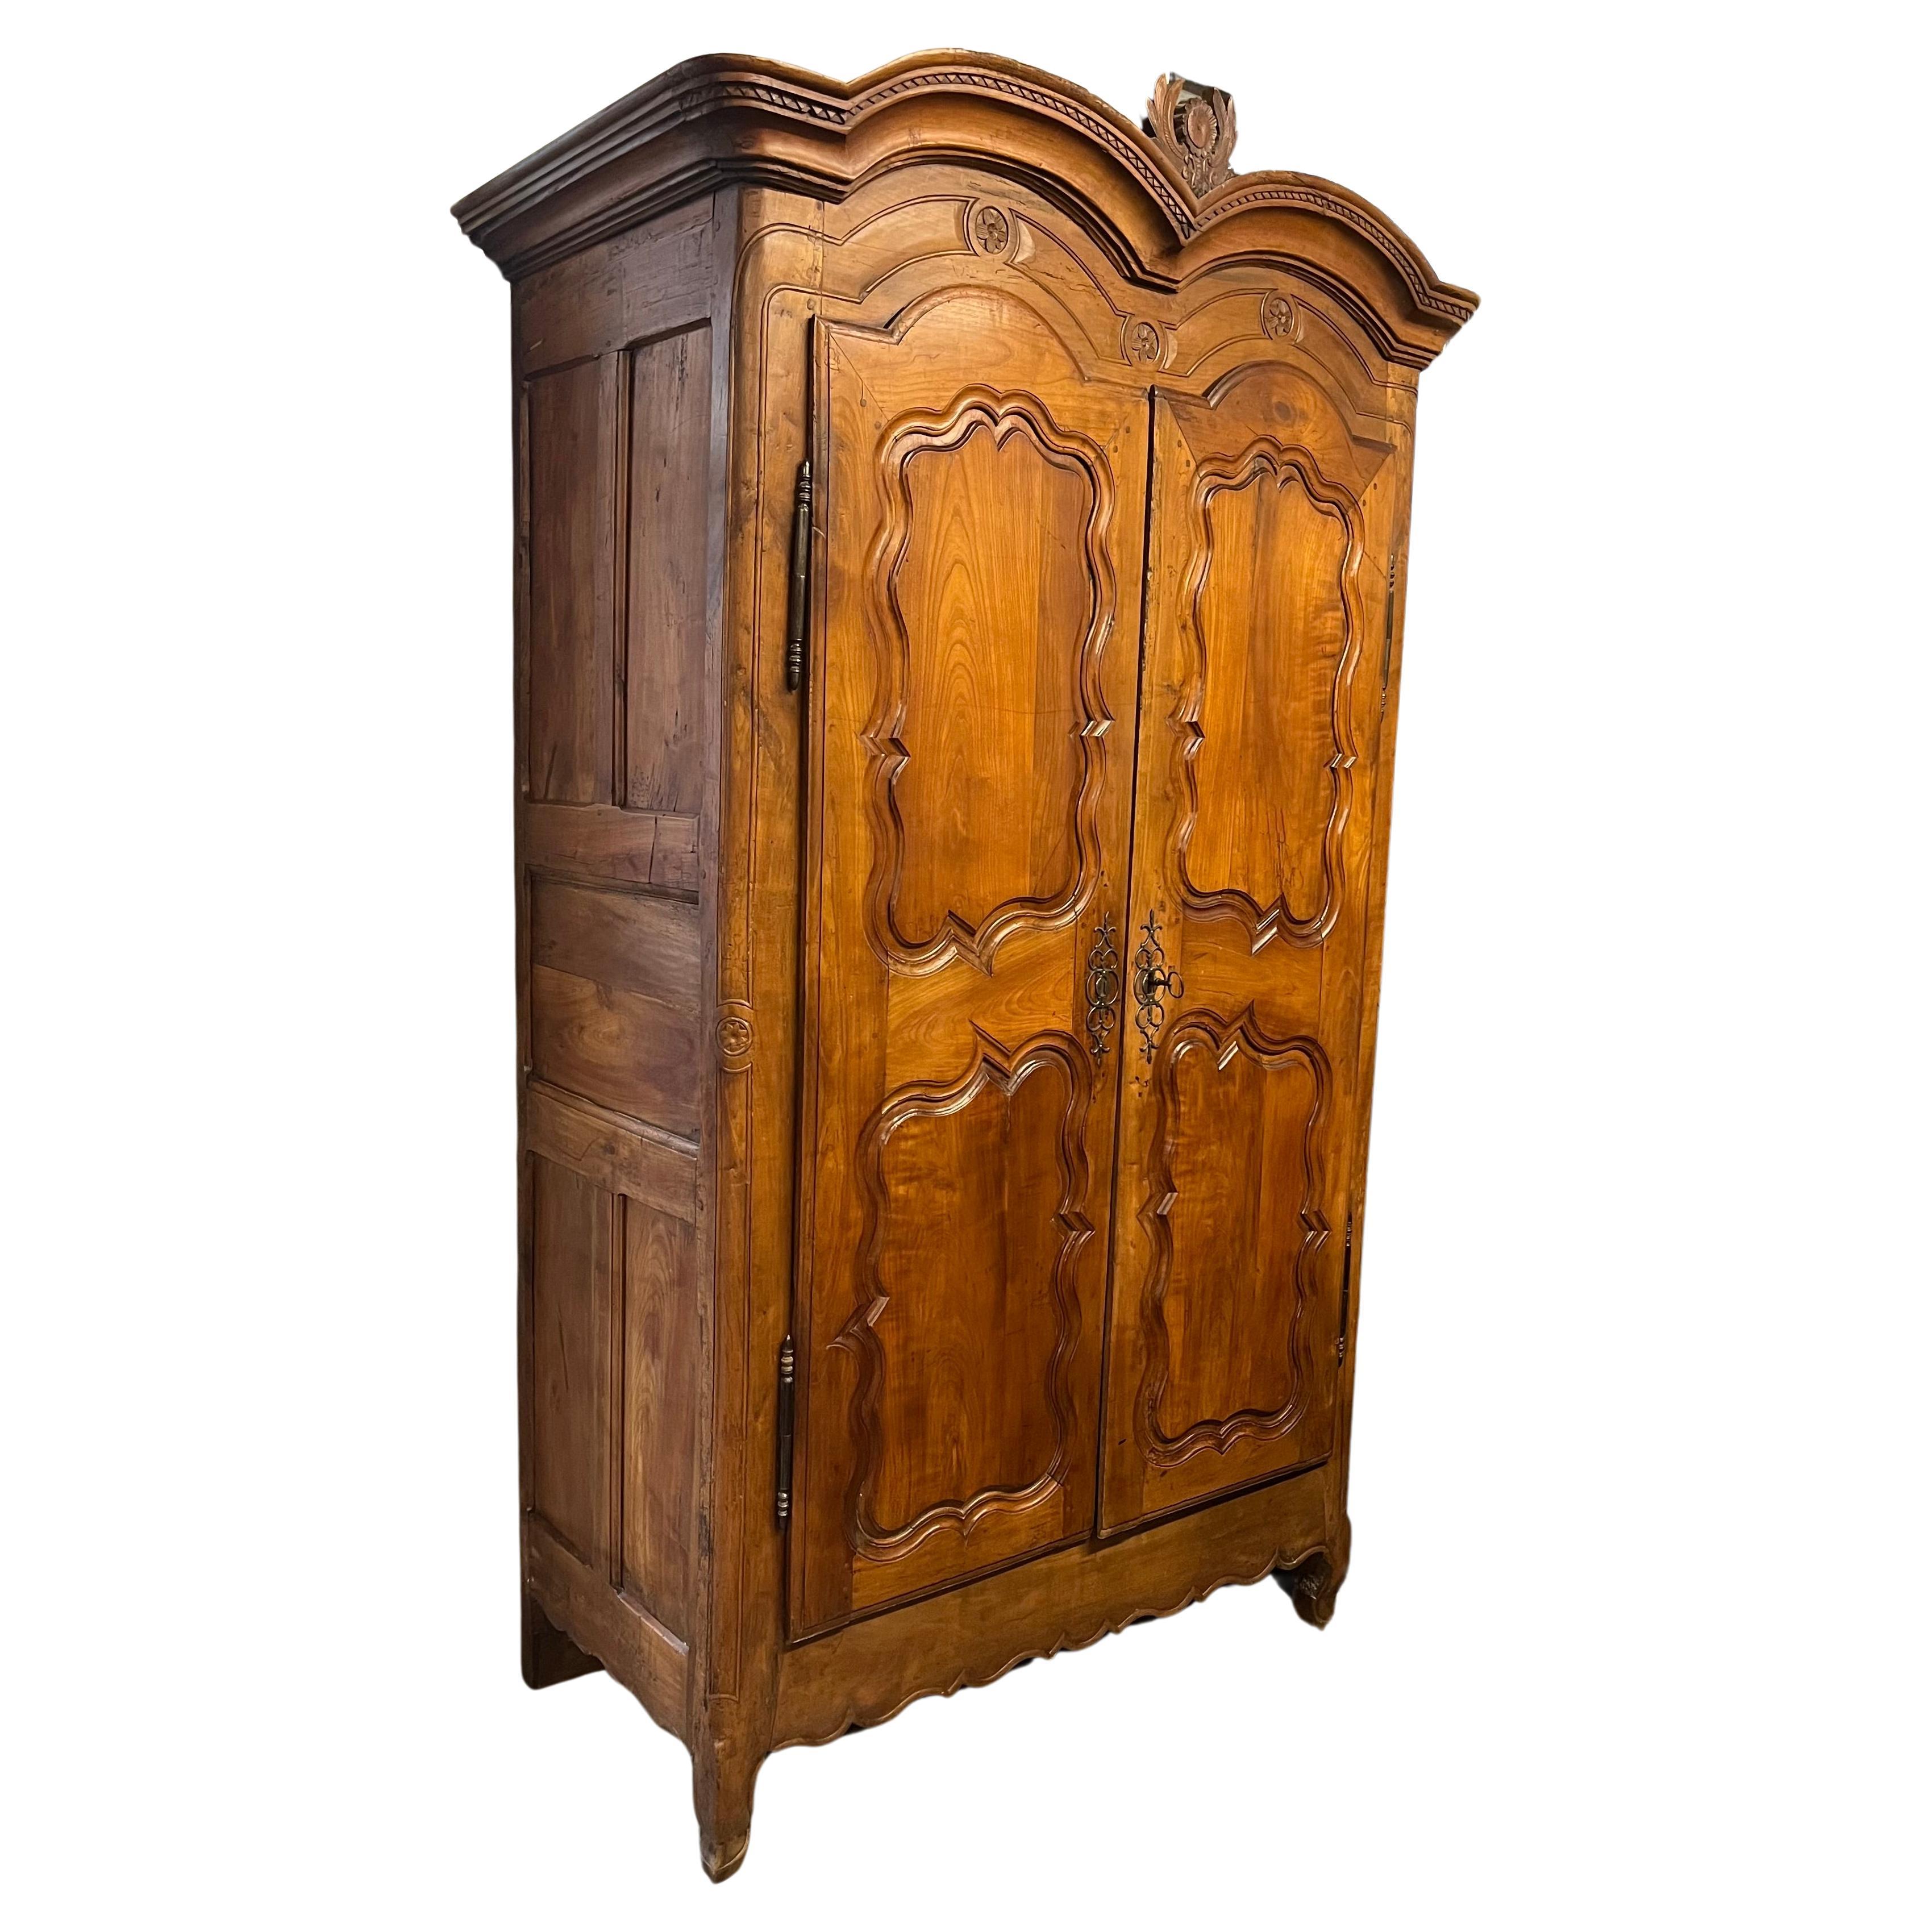 French Country Armoire In Cherry, C. 1790